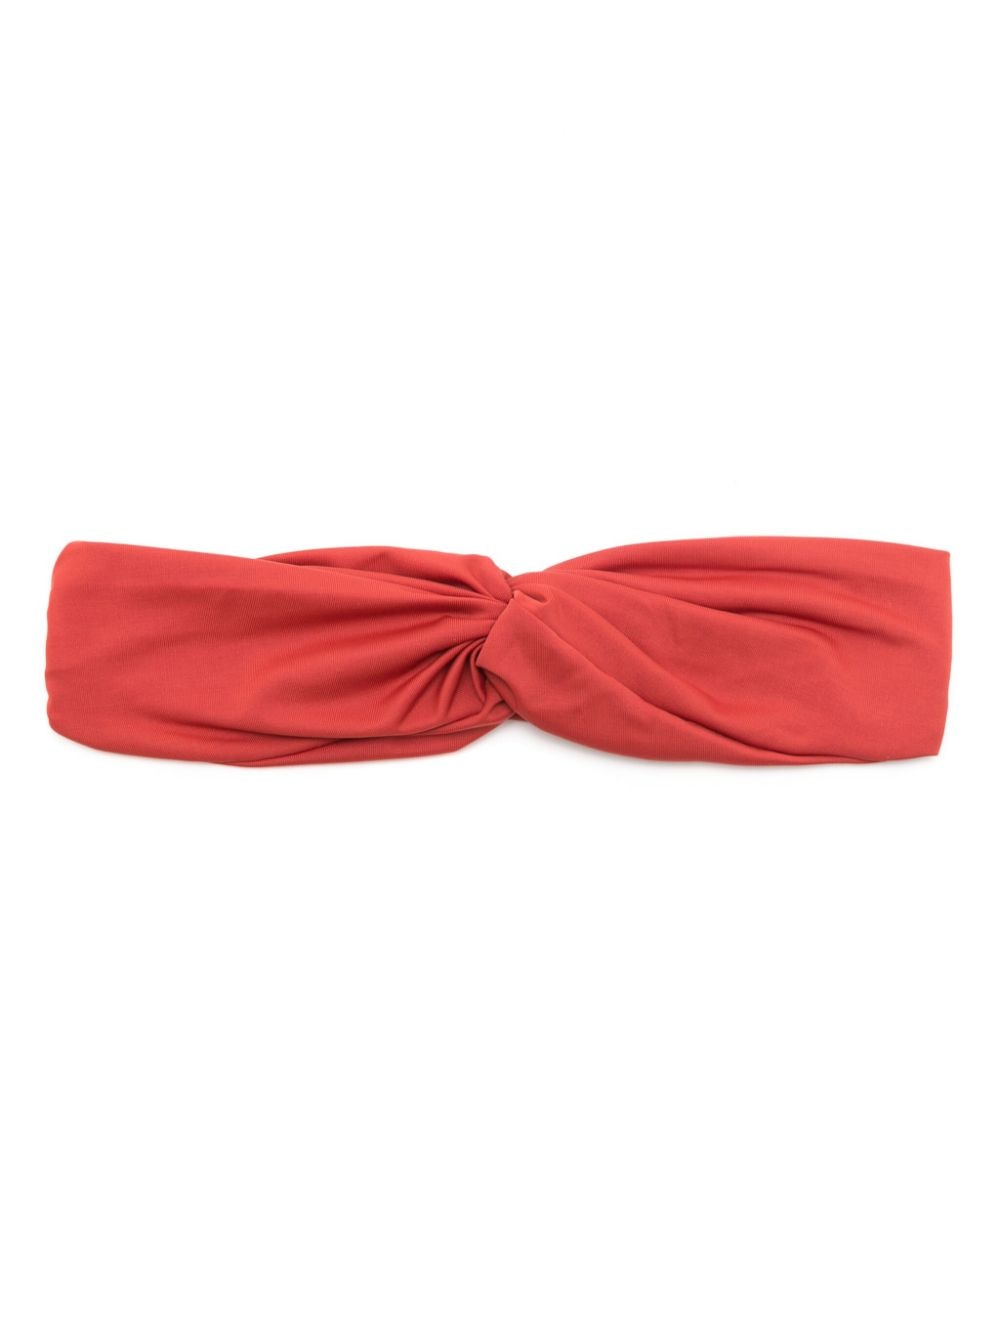 Lygia & Nanny Bethania Twisted Head Band In Red